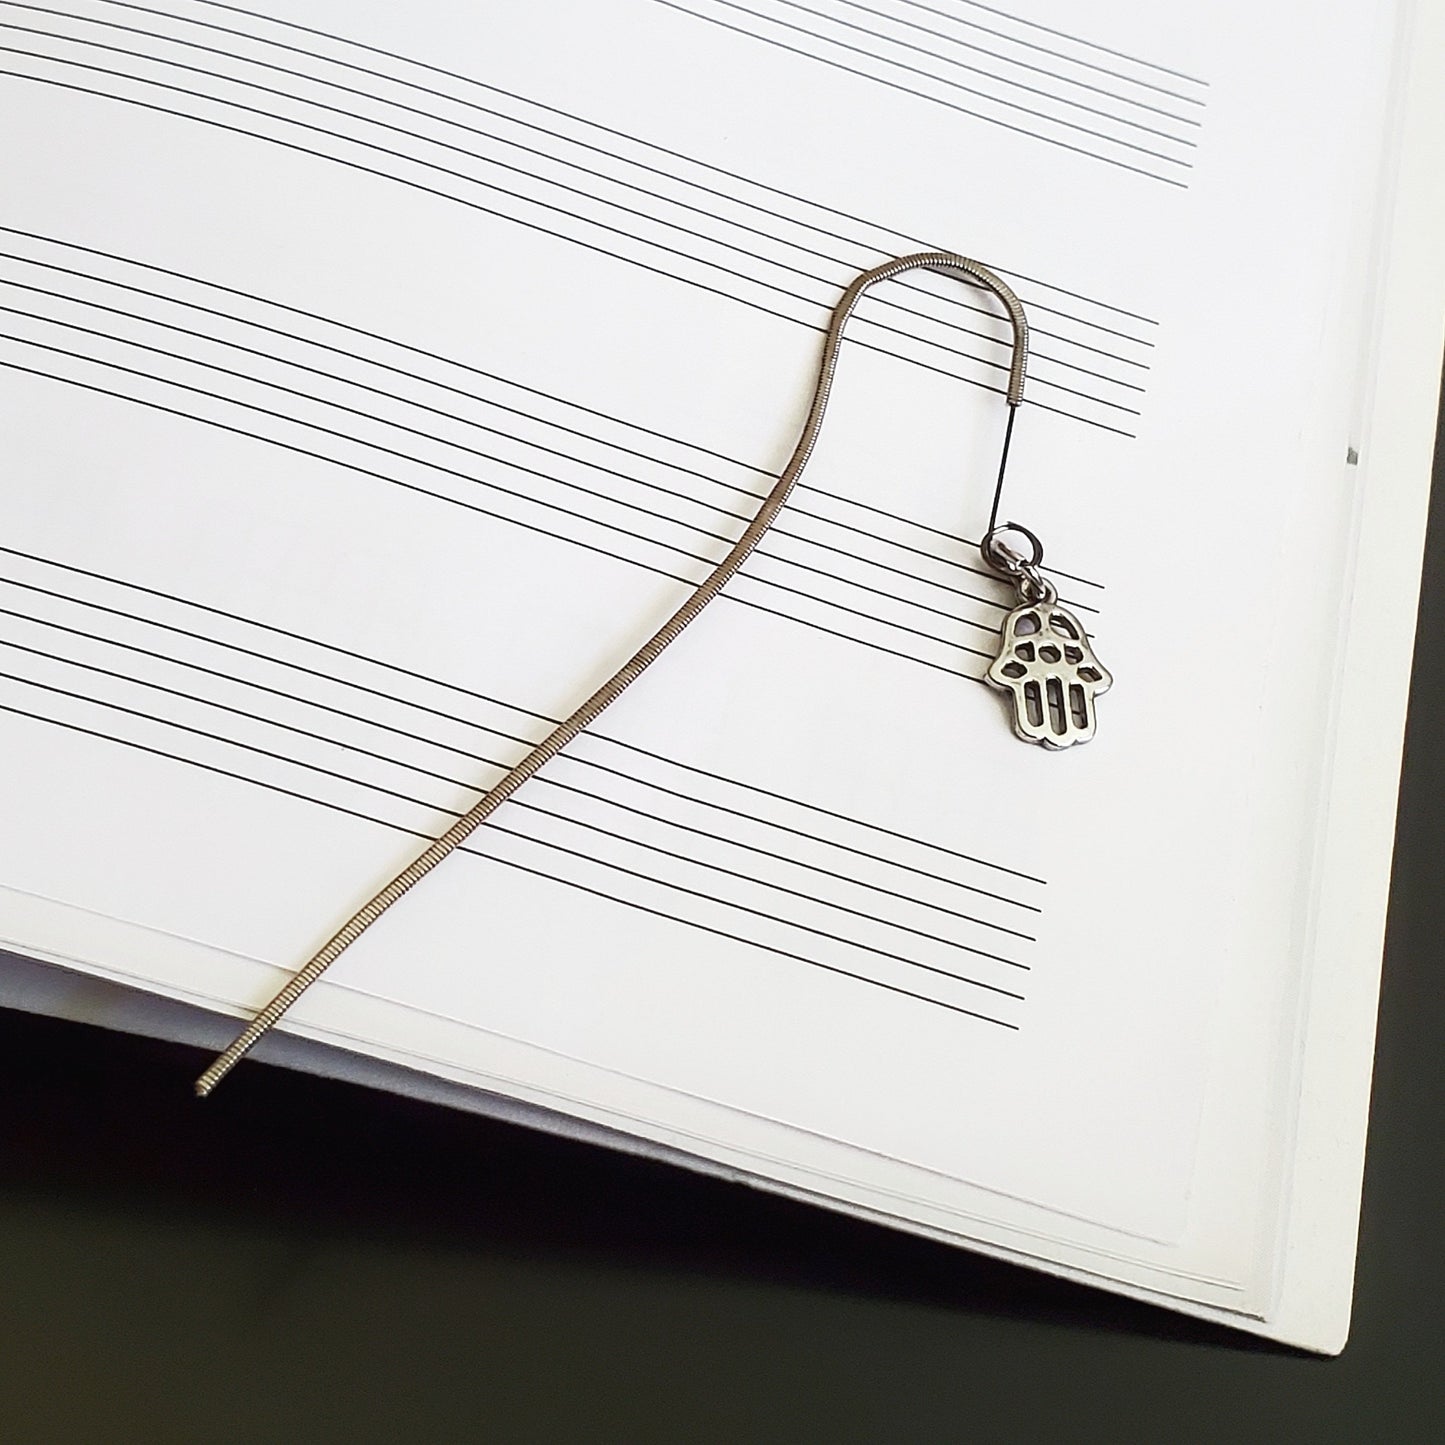 Hook Style Hammered Guitar String Bookmark with Hamsa Charm